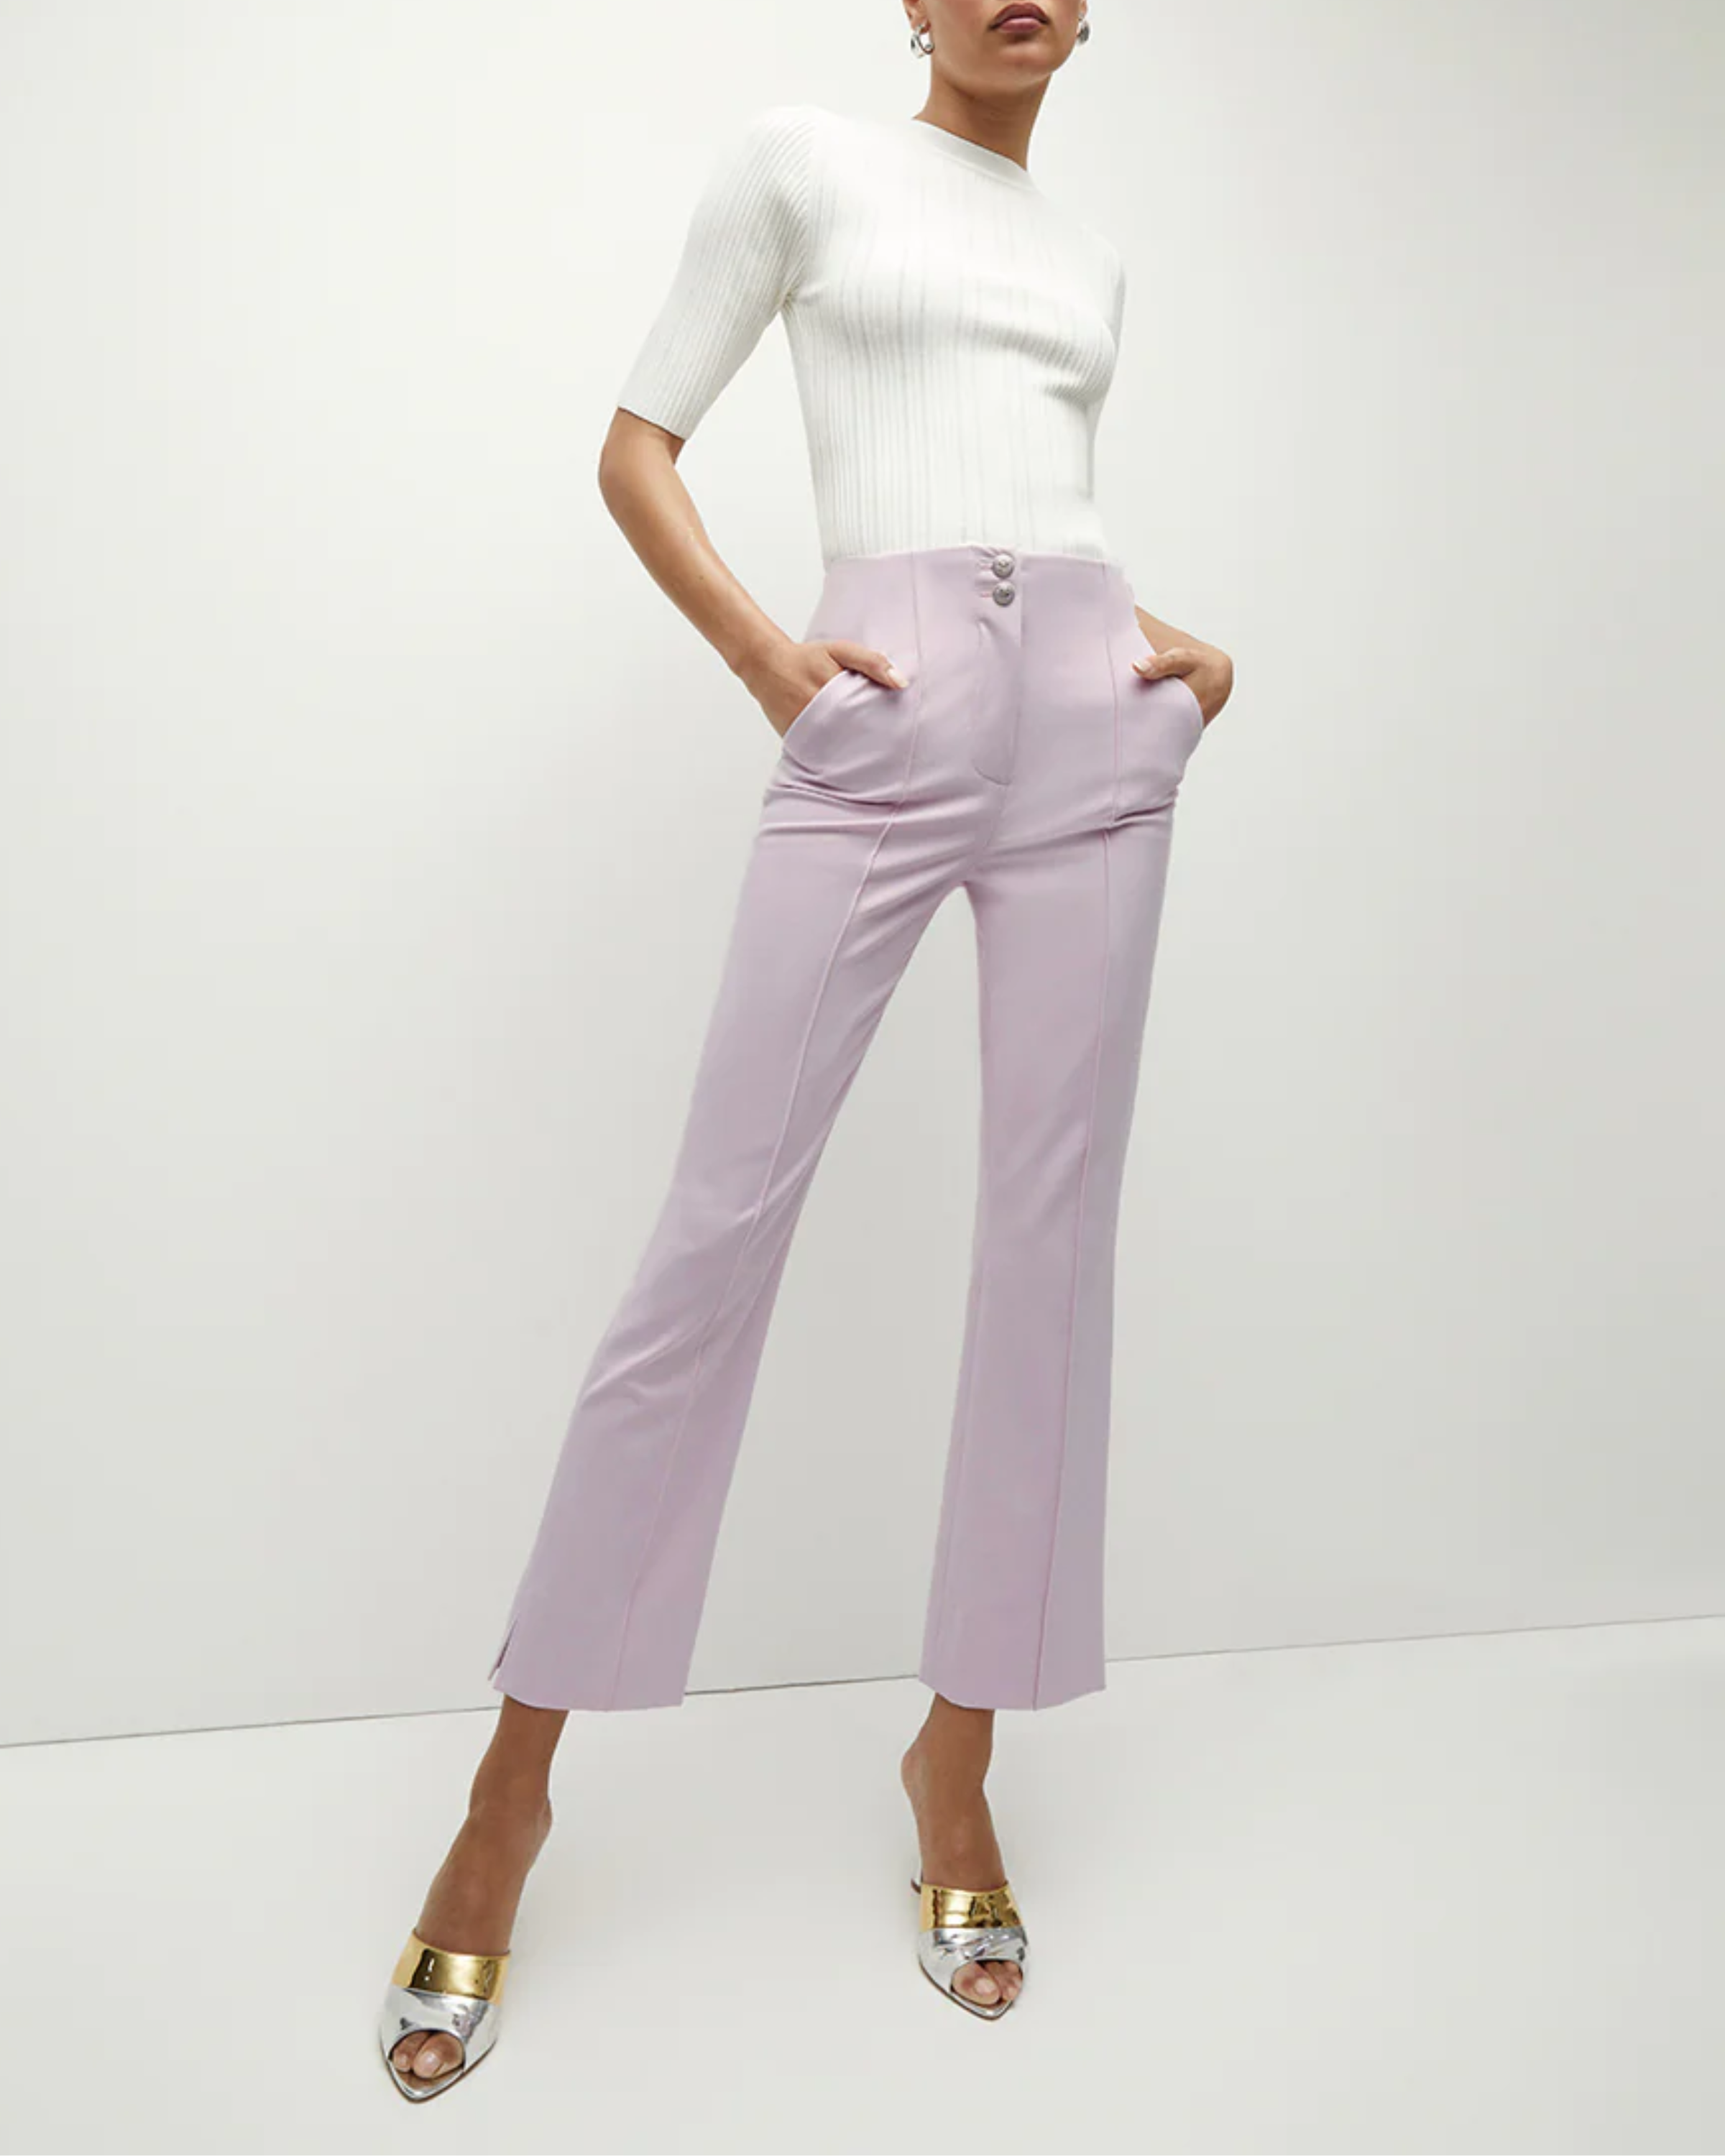 Veronica Beard Kean Pant in Barely Orchid